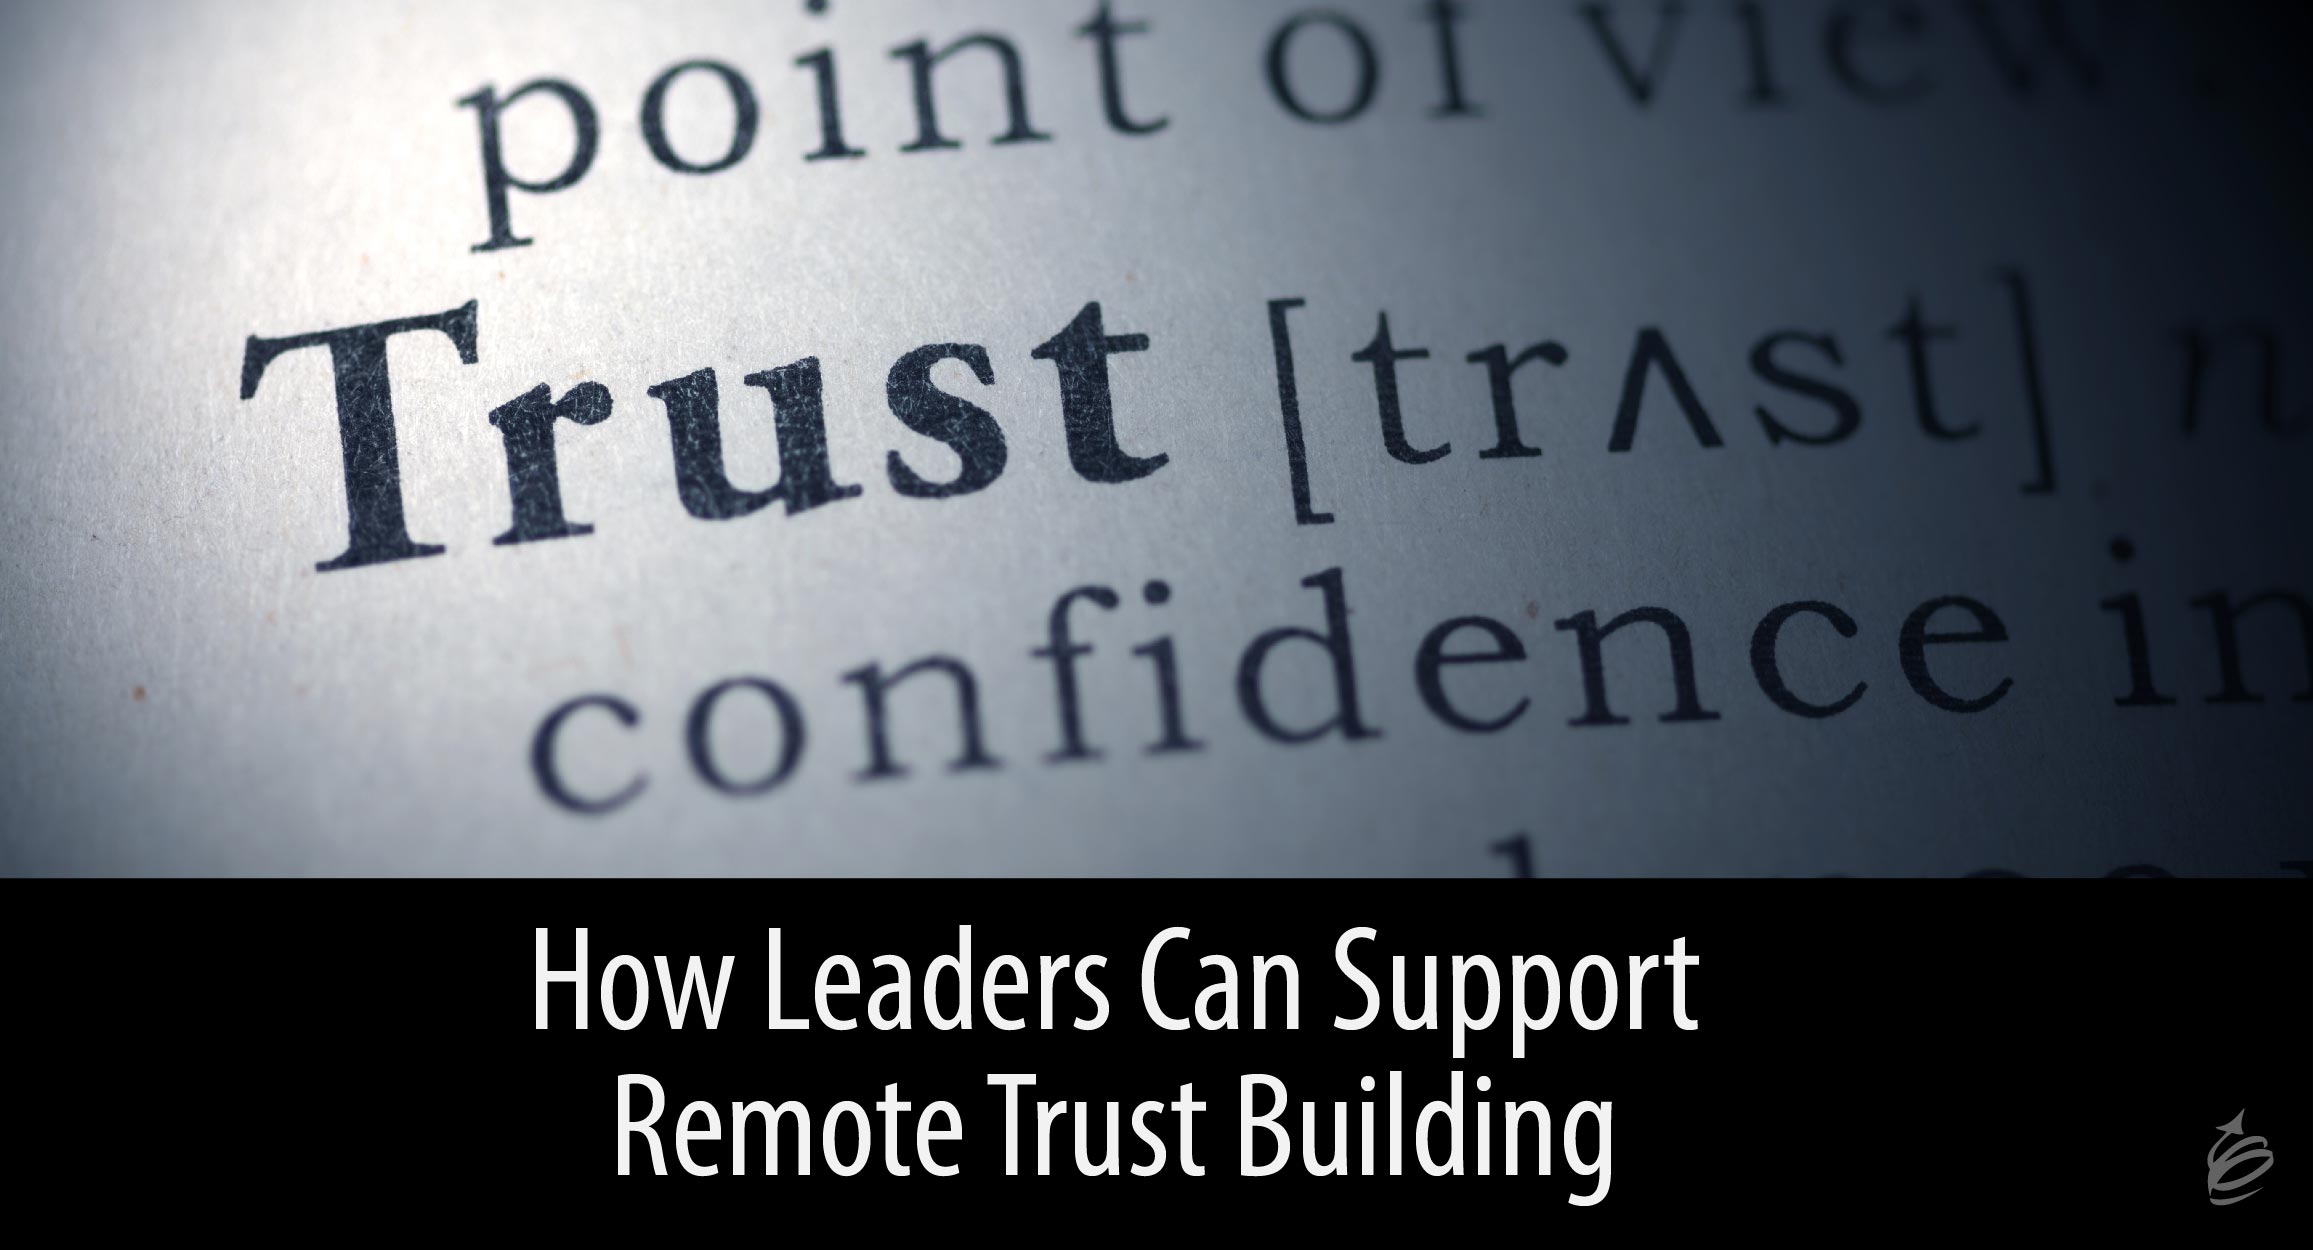 Leaders support remote trust building